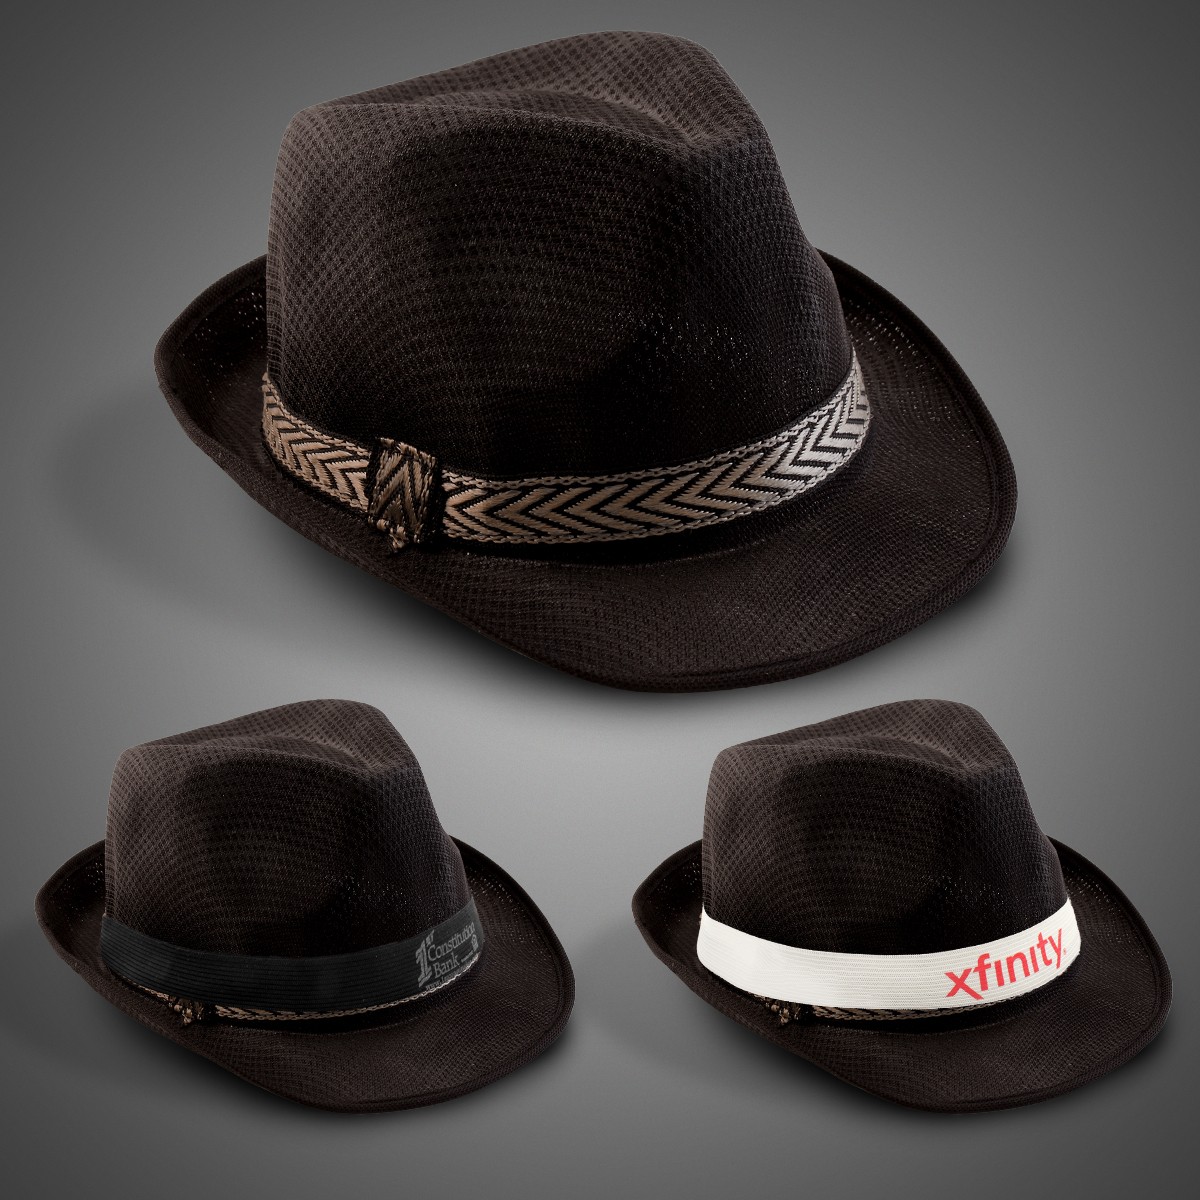 Black Funky Fedora (Imprintable Bands Available)